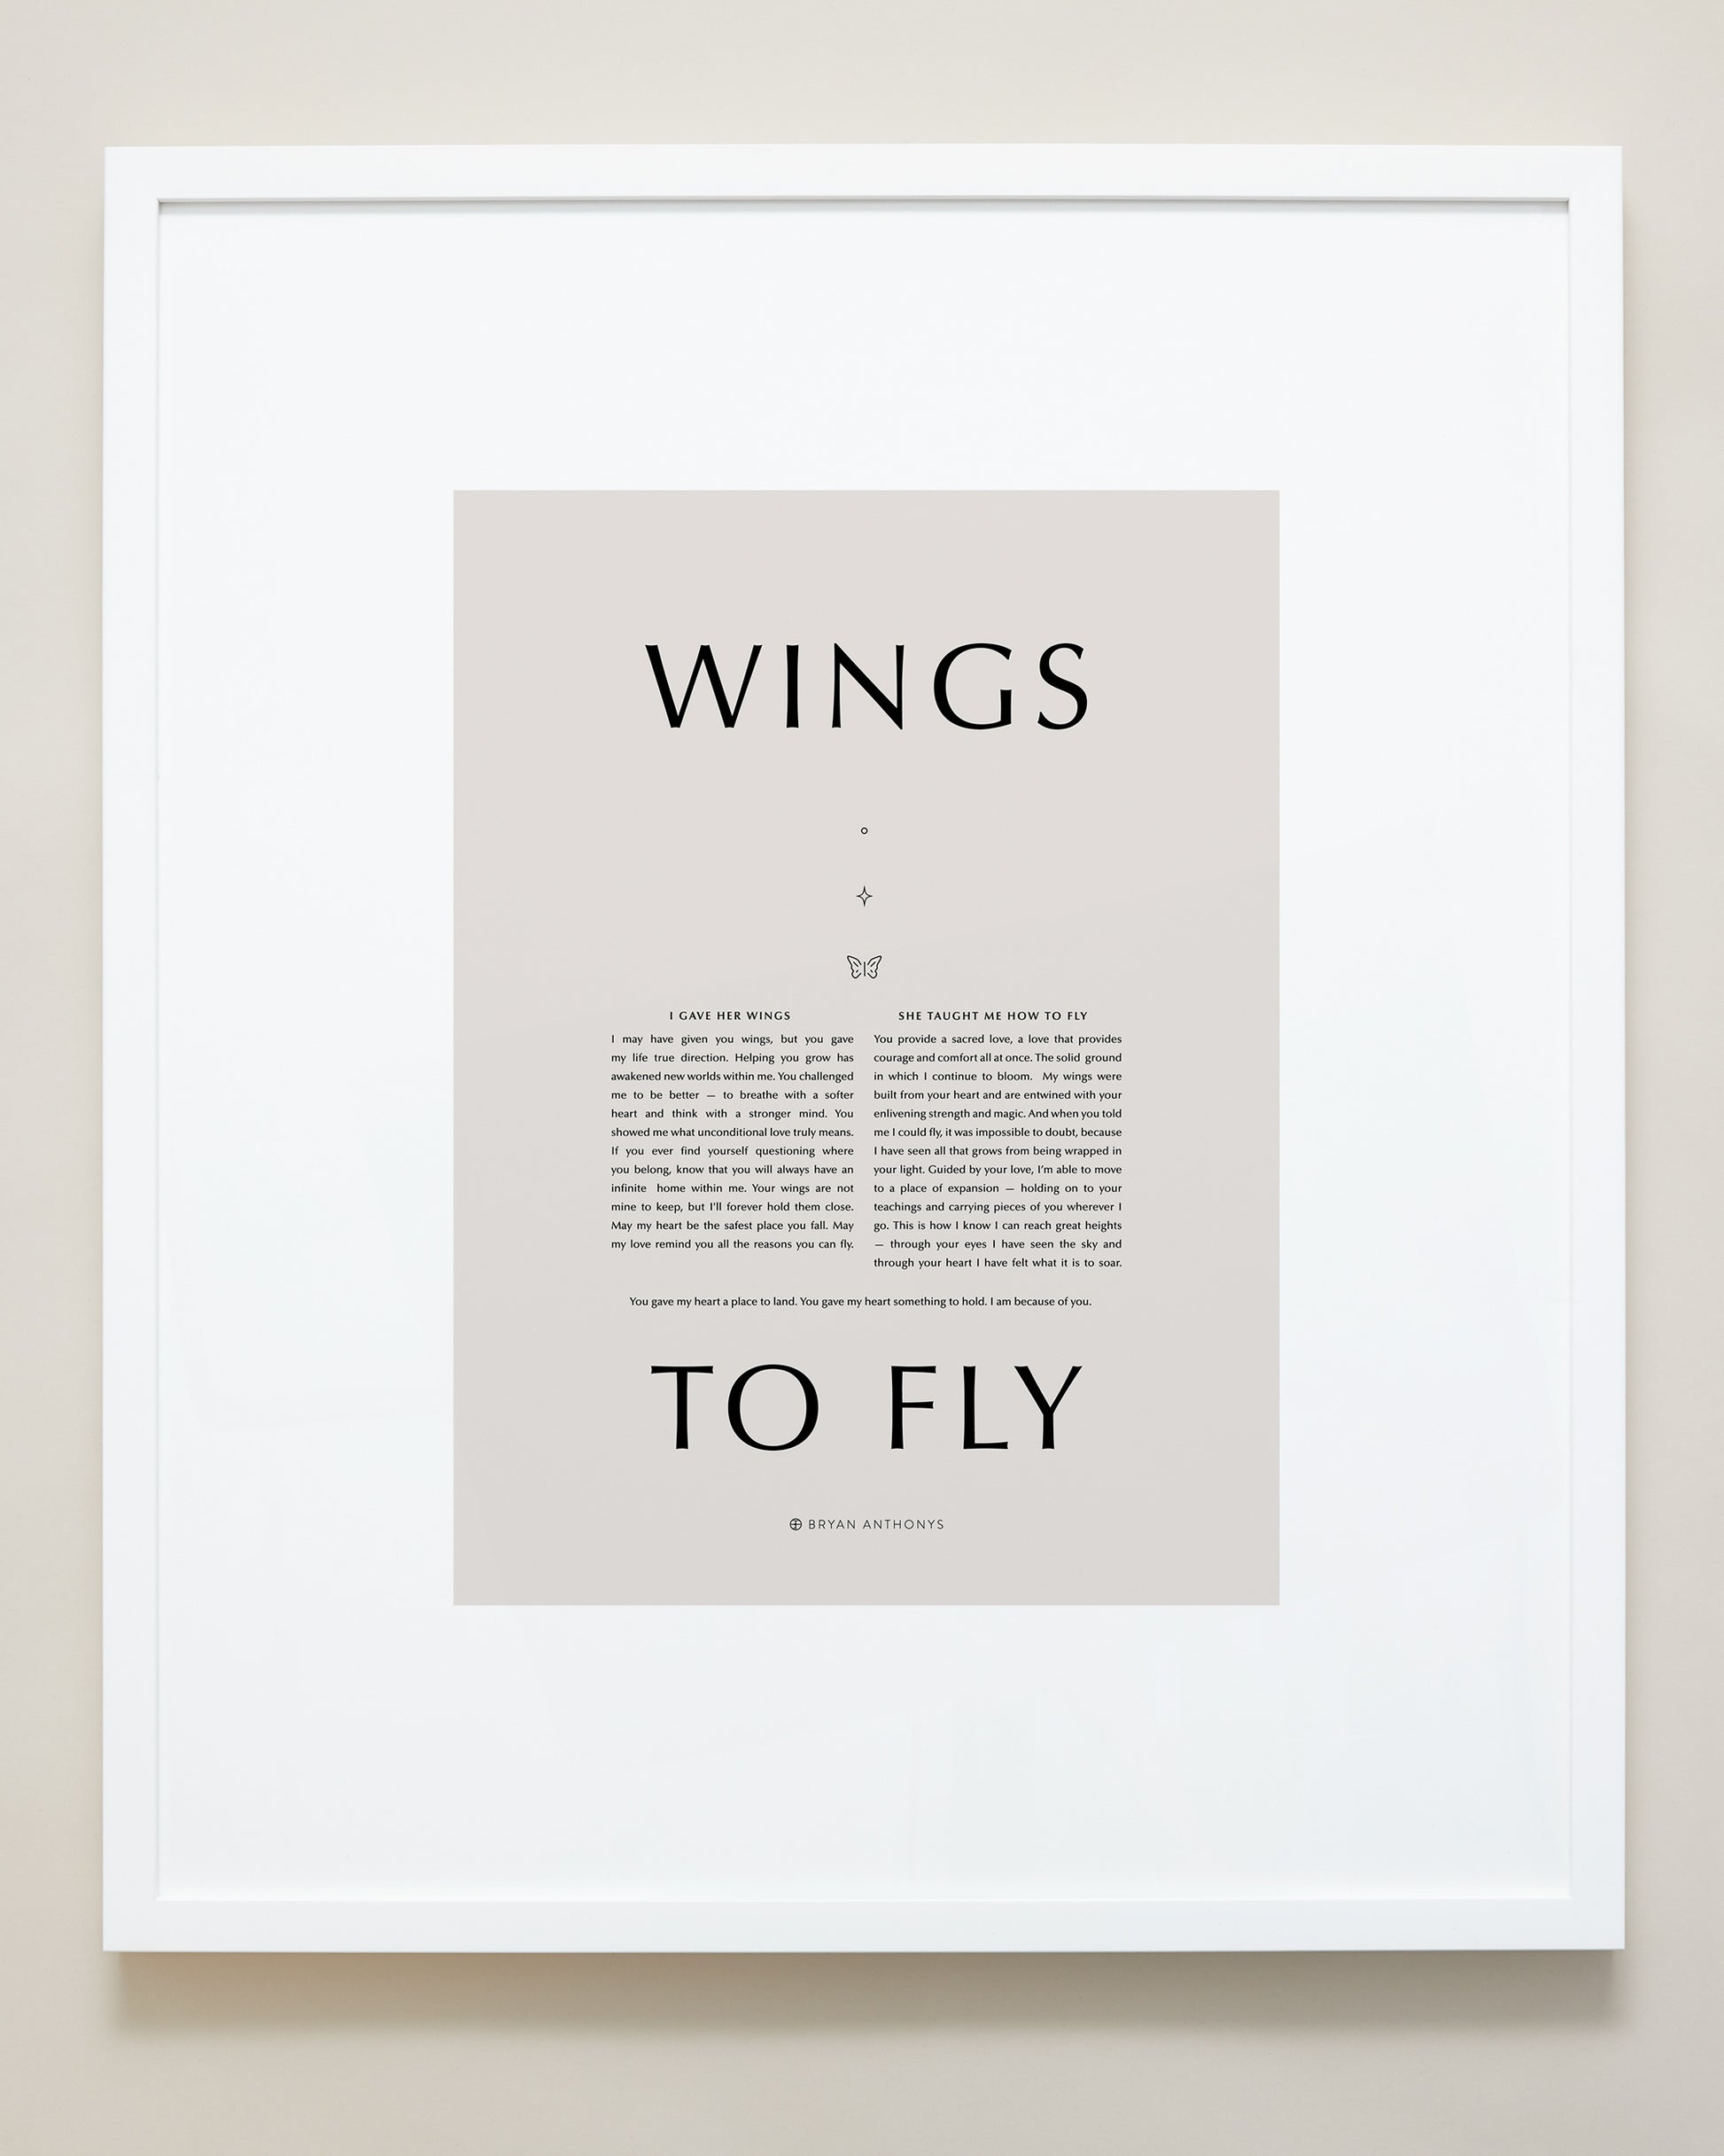 Bryan Anthonys Home Decor Wings To Fly Framed Print 20x24 White Frame with Tan